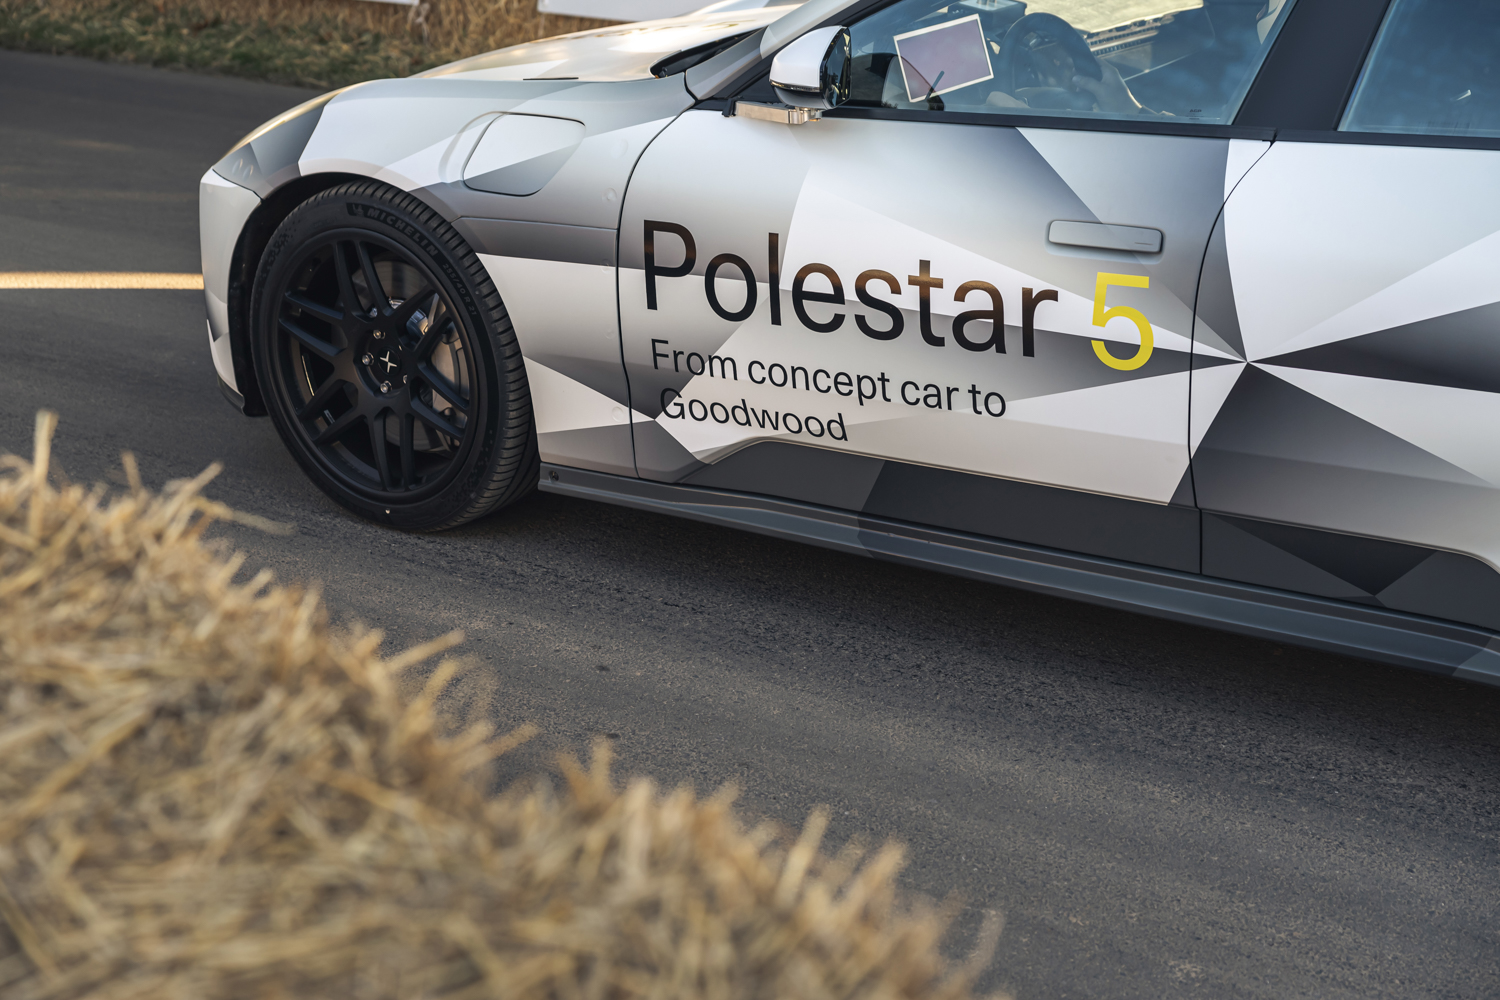 Polestar 5 to feature all-new powertrain